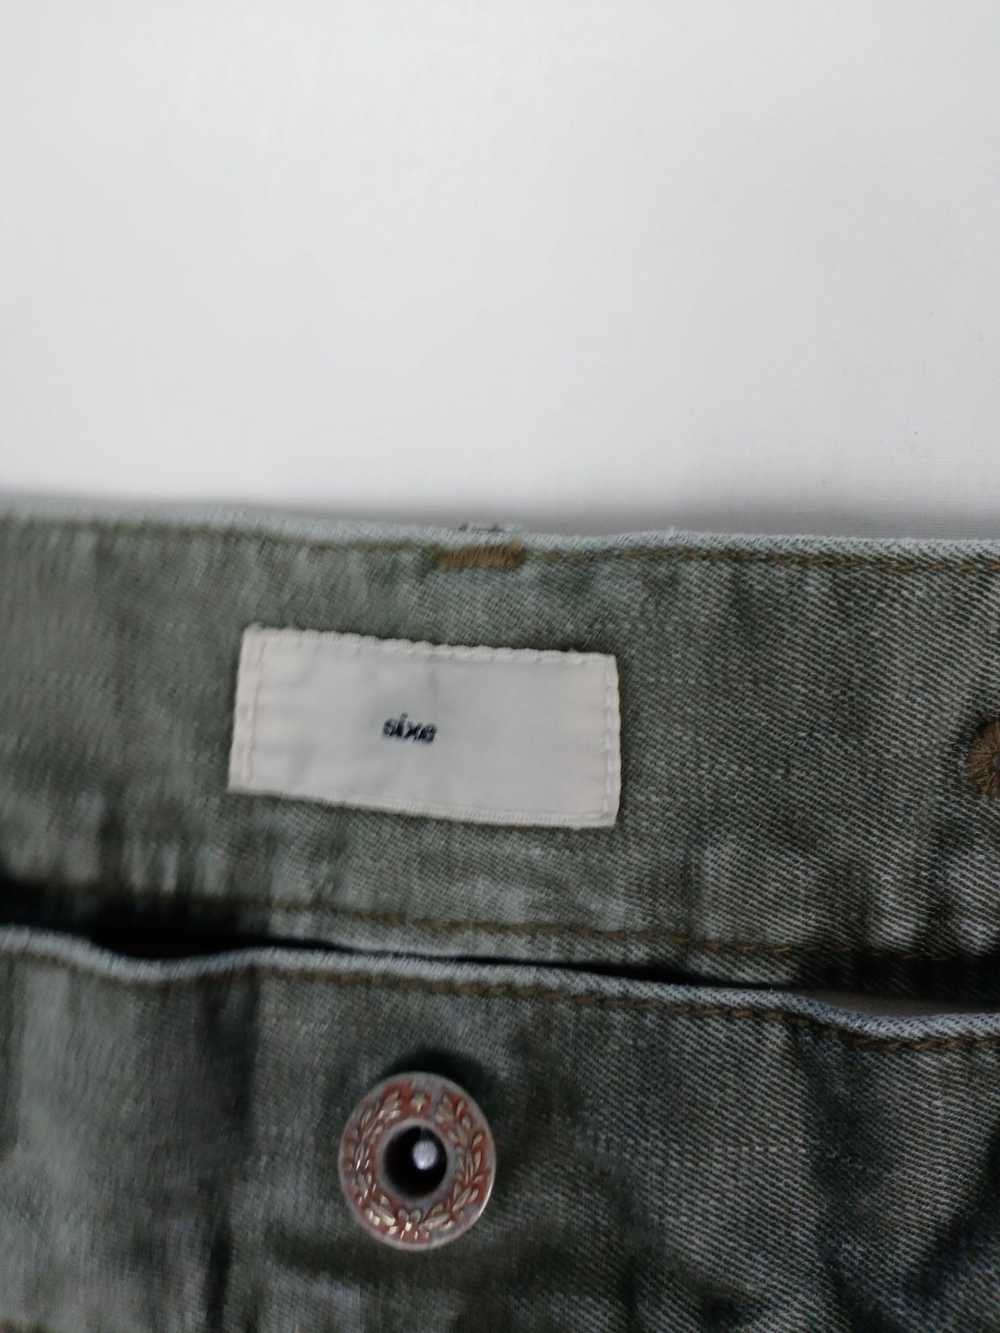 Japanese Brand × Military × Sixe Vintage Sixe Mil… - image 6